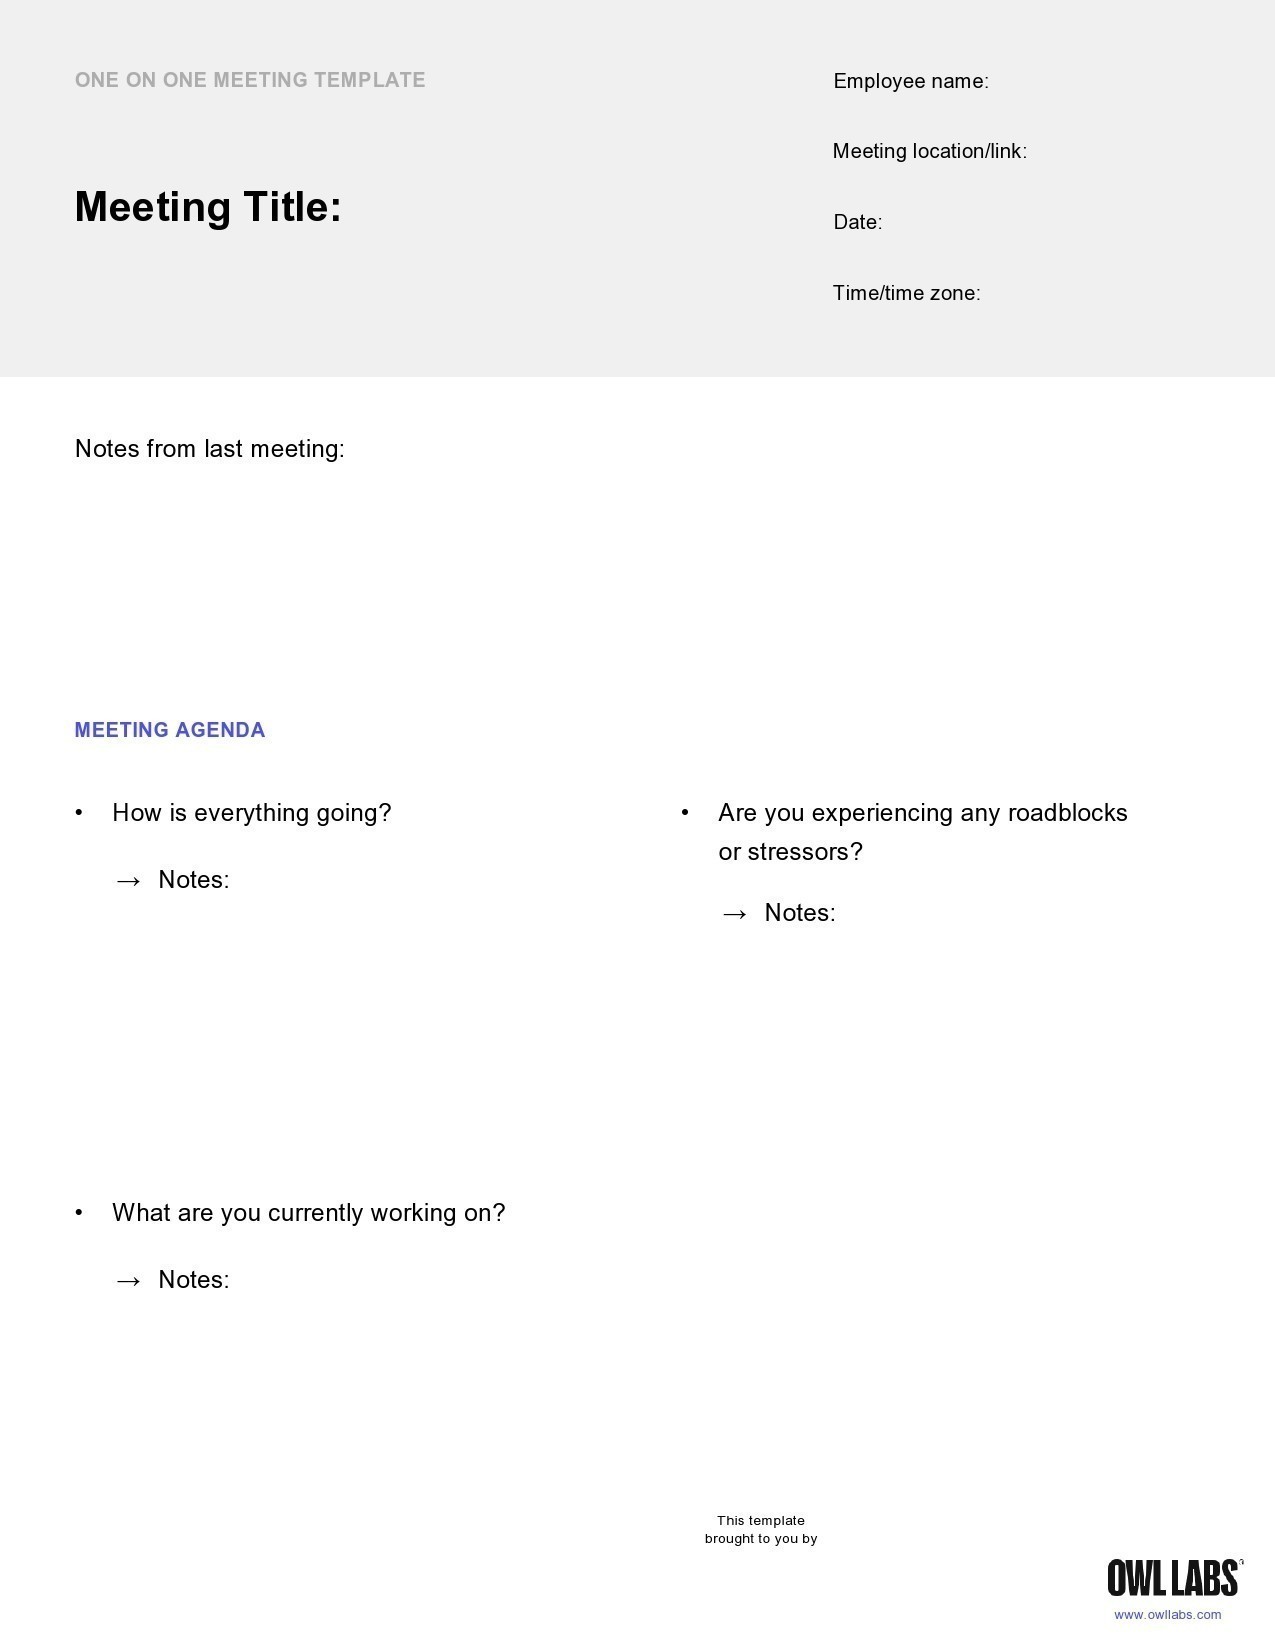 Free one to one meeting template 15